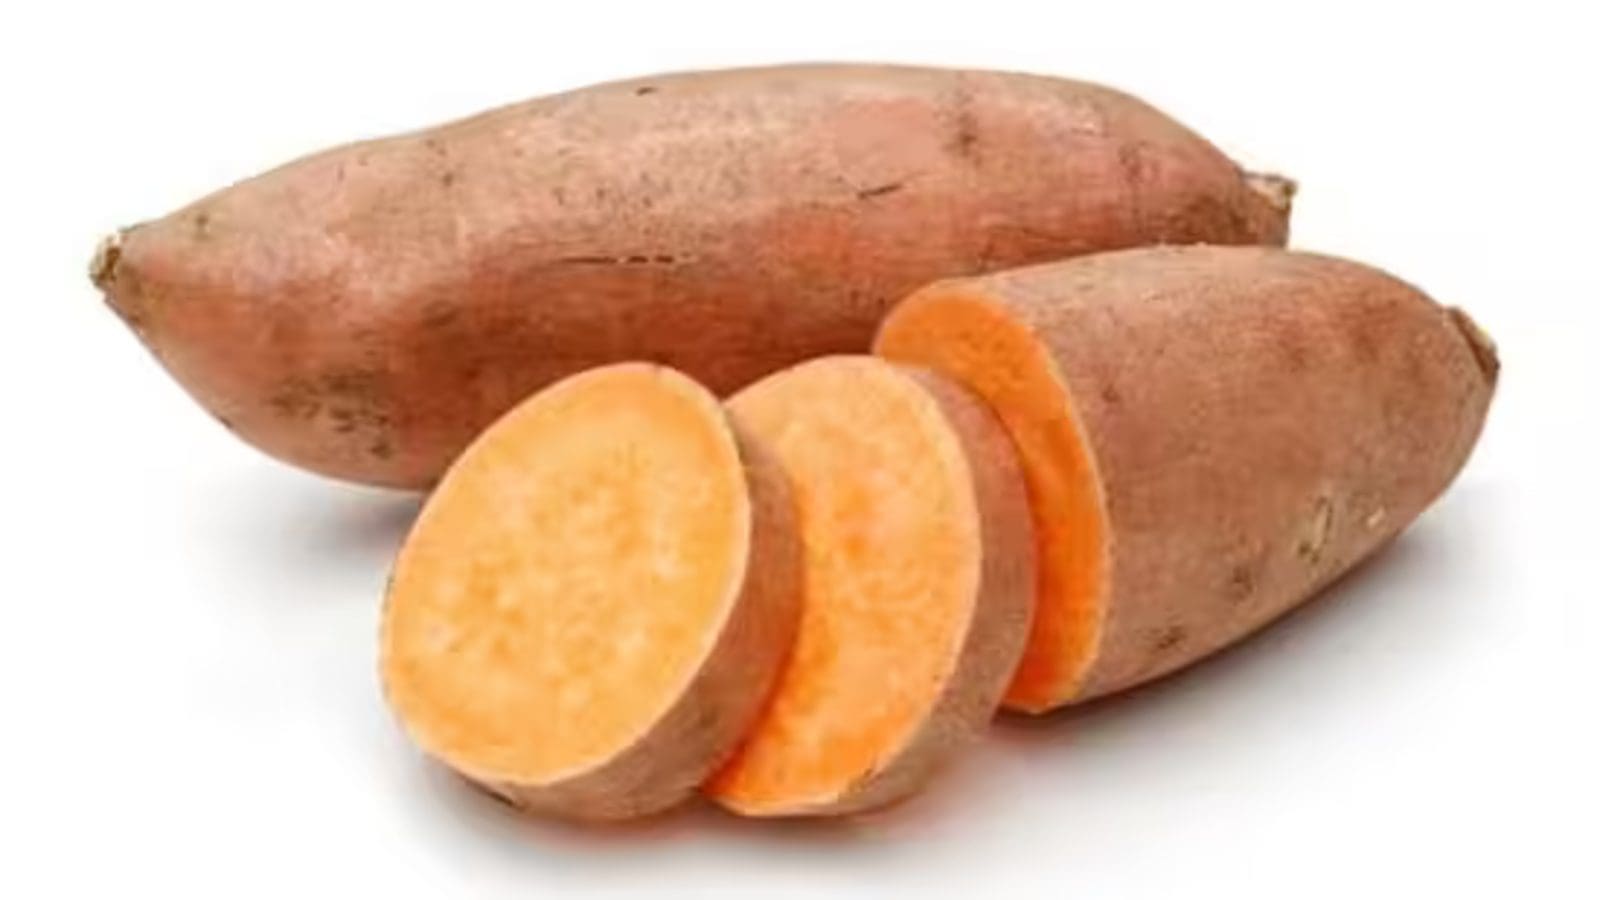 Sweet potatoes may be the game-changer in healthy gluten-free flour, study reveals